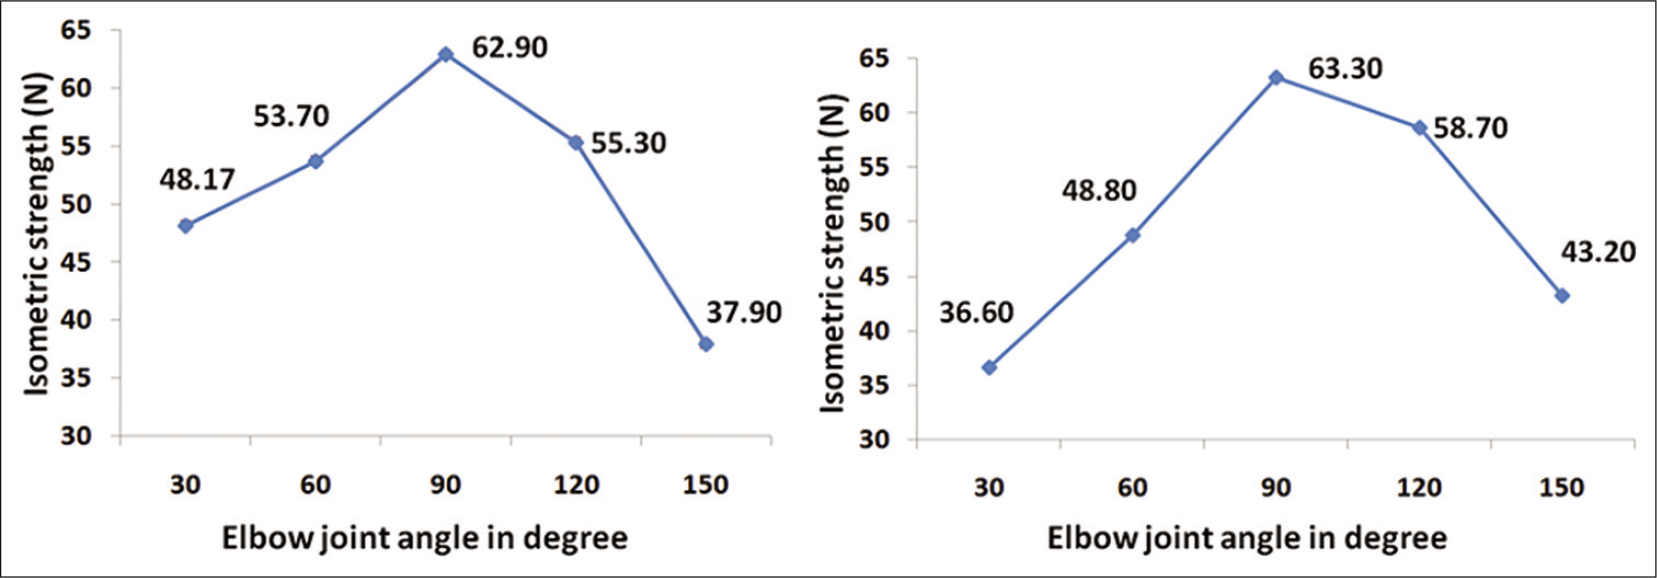 Isometric strength curves of elbow flexors (left) and elbow extensors (right) of the right side. Y-axis shows isometric strength in Newton, and X-axis shows elbow angle in degree. The optimal angle is 90° elbow angle (recording is done using isometric dynamometer with response range of 0–800 N at 1 k/s sampling rate).